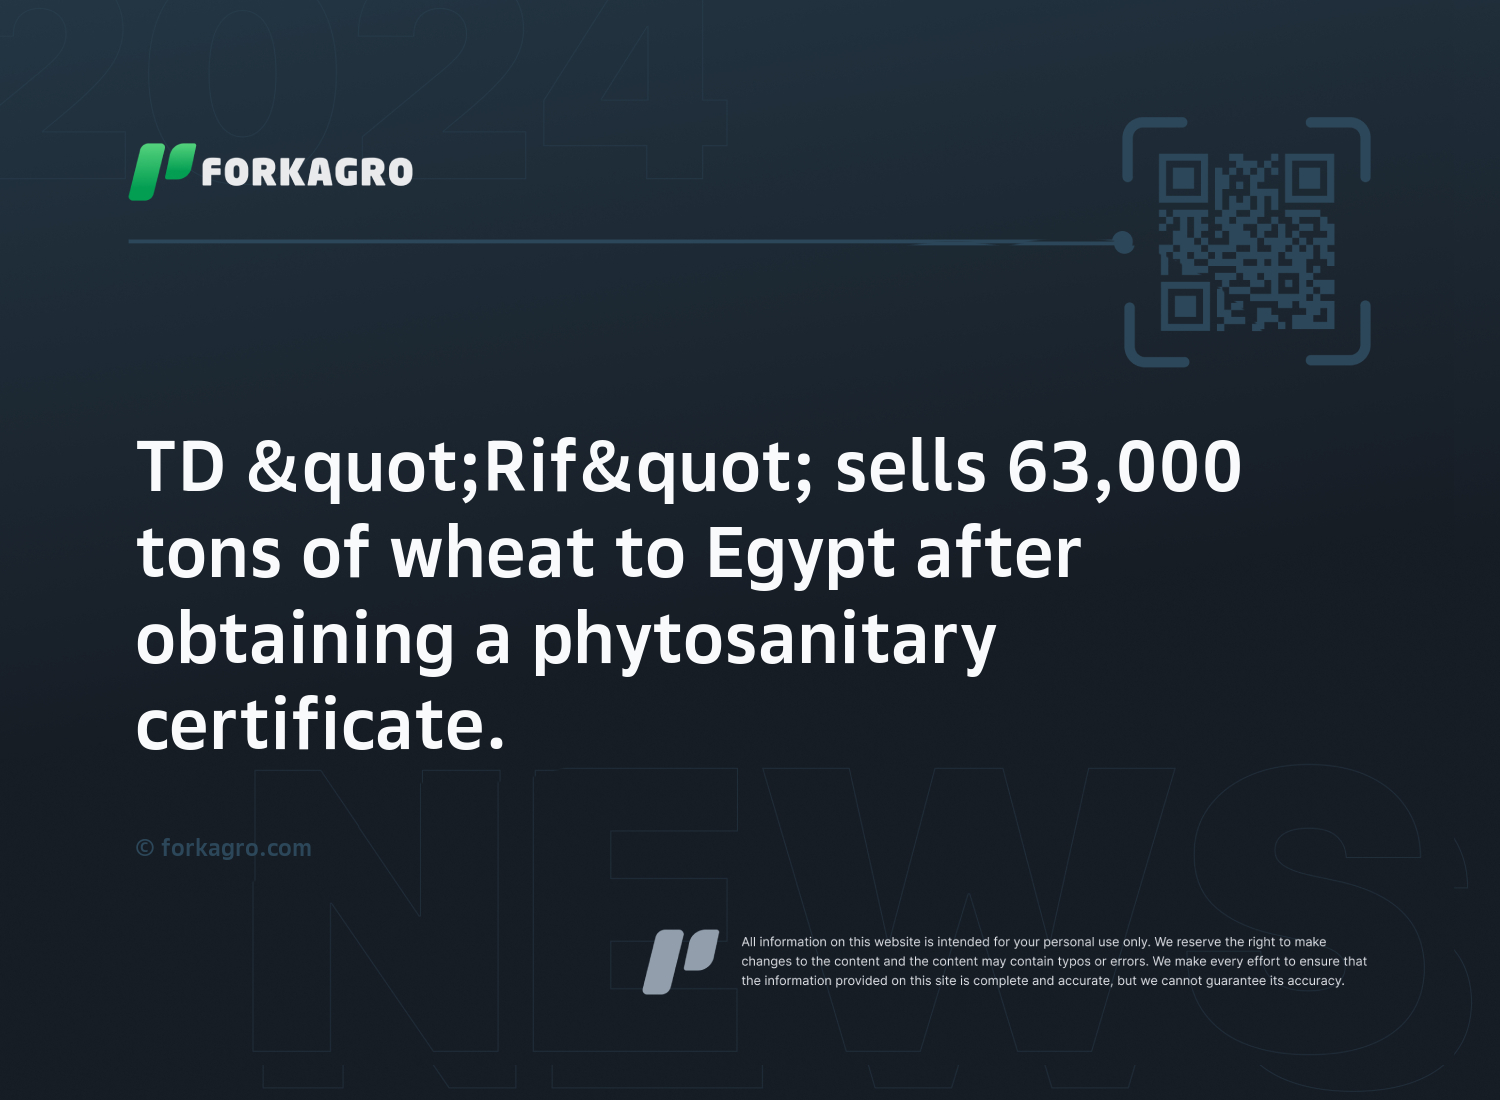 TD "Rif" sells 63,000 tons of wheat to Egypt after obtaining a phytosanitary certificate.